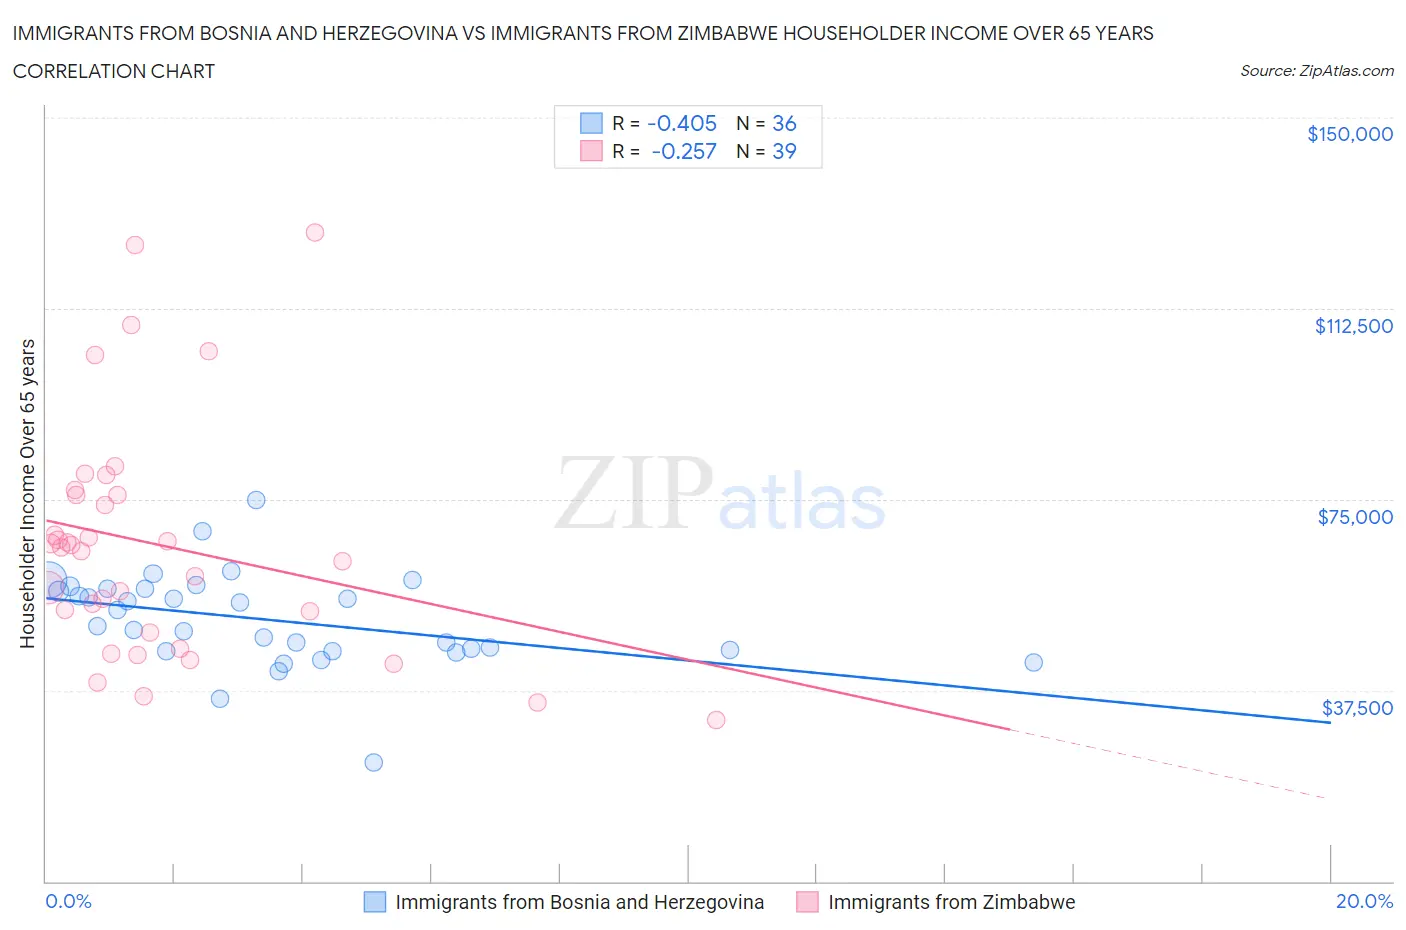 Immigrants from Bosnia and Herzegovina vs Immigrants from Zimbabwe Householder Income Over 65 years